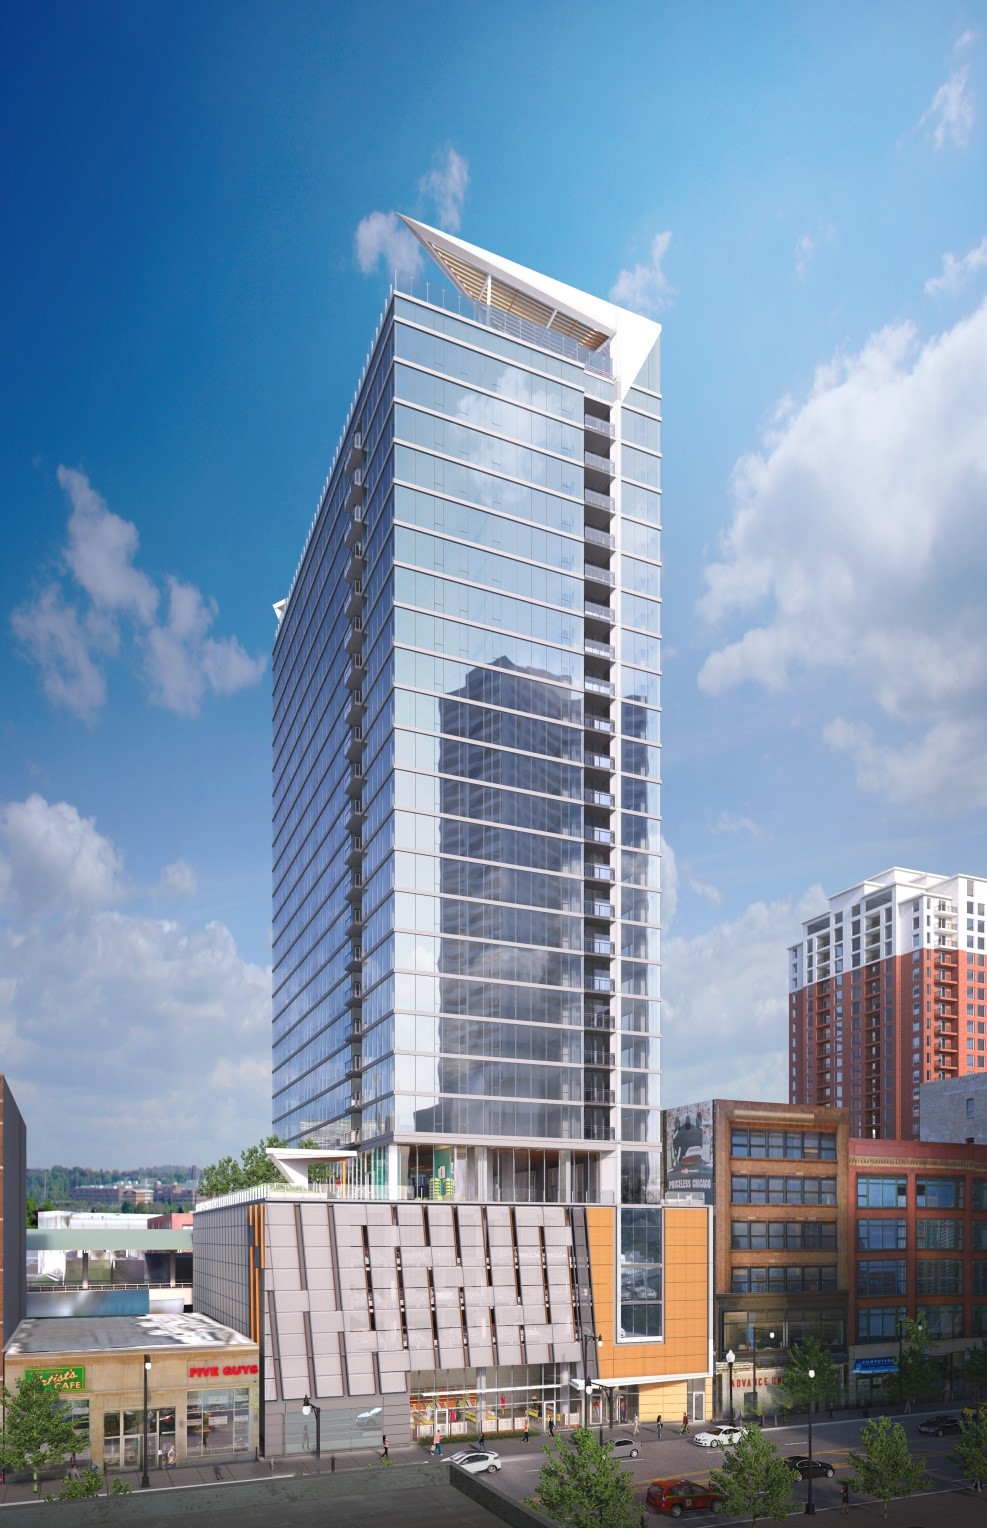 New 26-story multi-use pre-stressed concrete apartment tower with enclosed ramped parking on floor 1-4. Amenities include roof top swimming pool, health club and ground level retail and lobby.